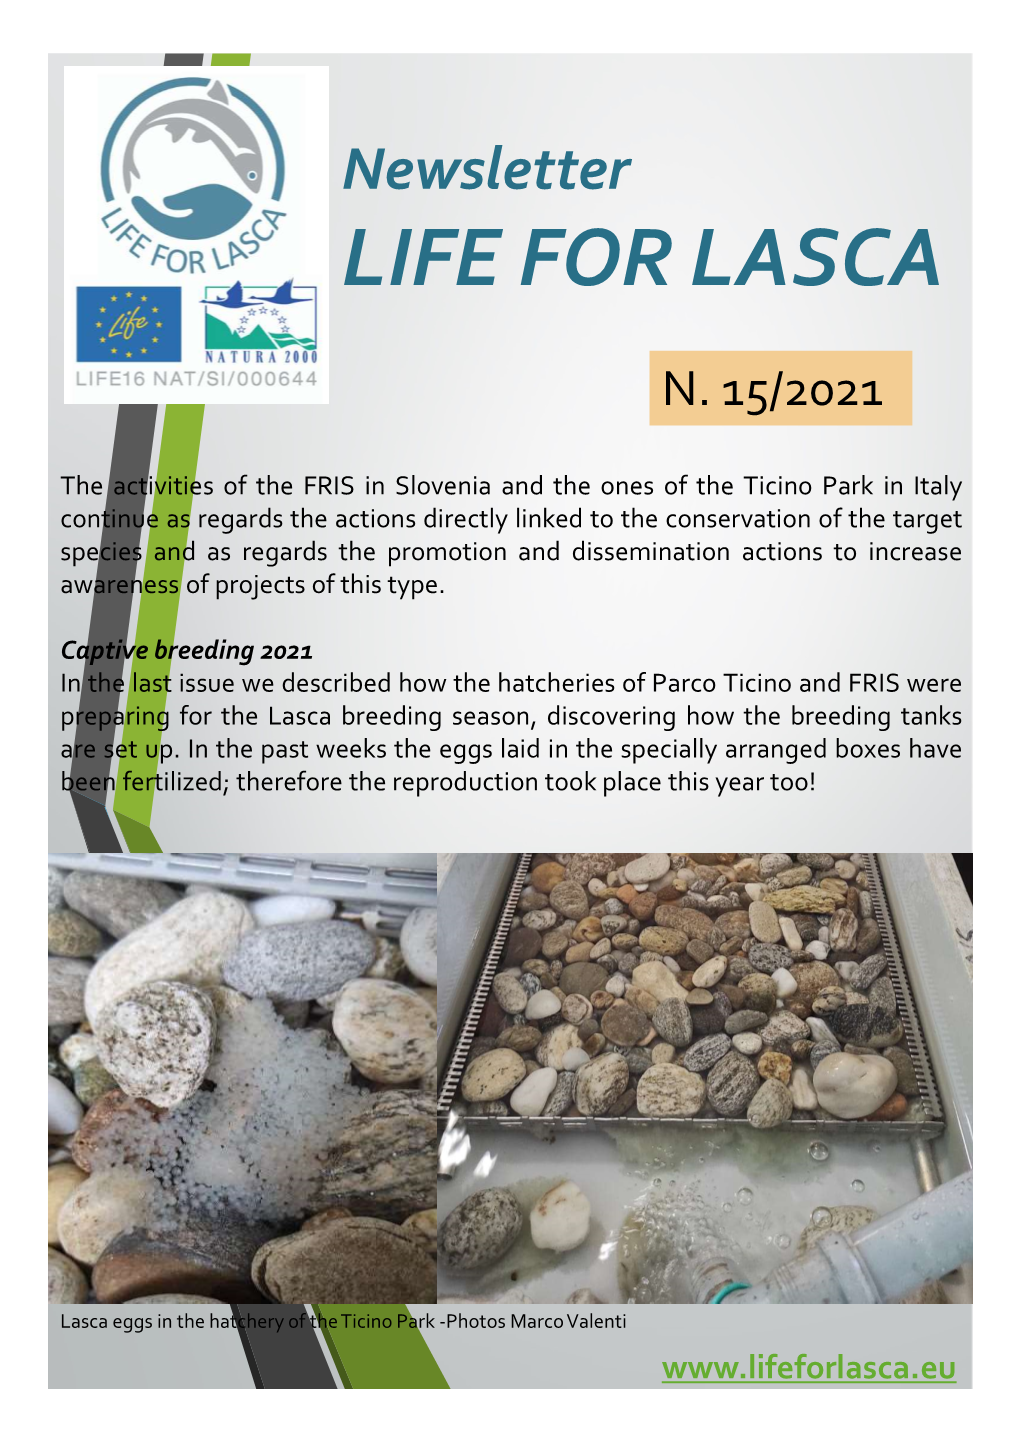 Life for Lasca